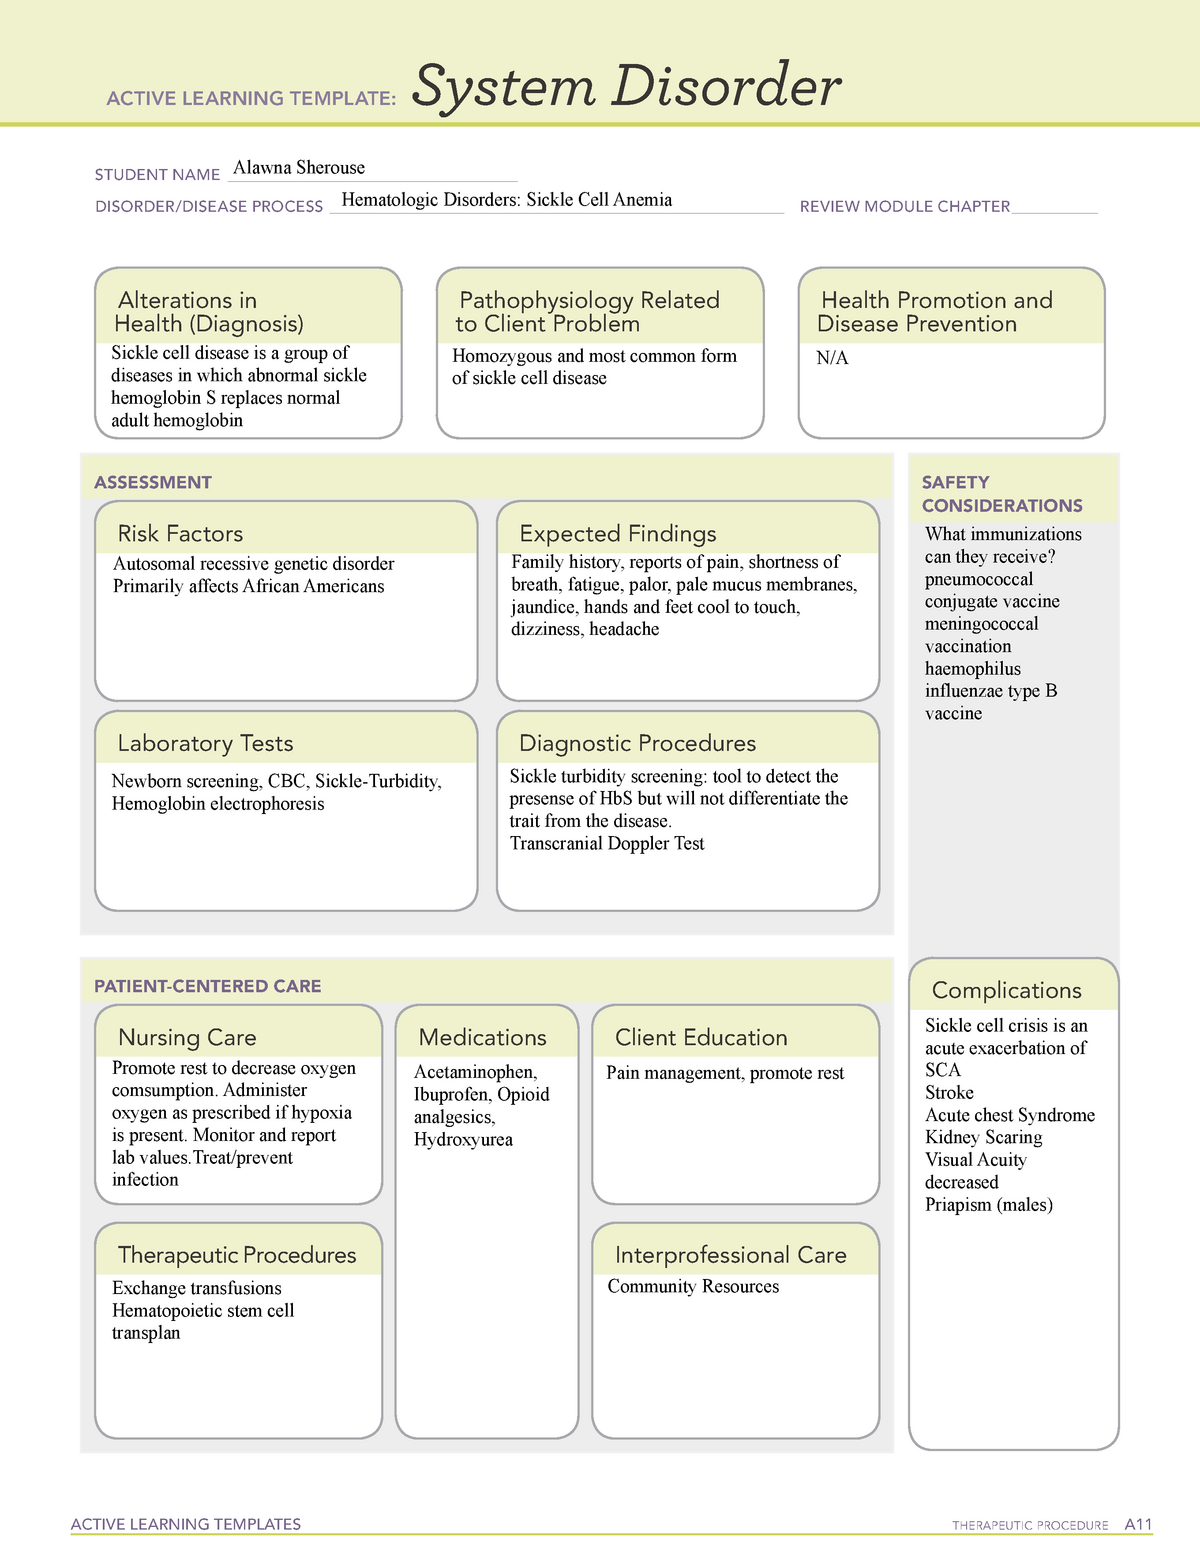 Active Learning Template system Dis-4 - ACTIVE LEARNING TEMPLATES ...